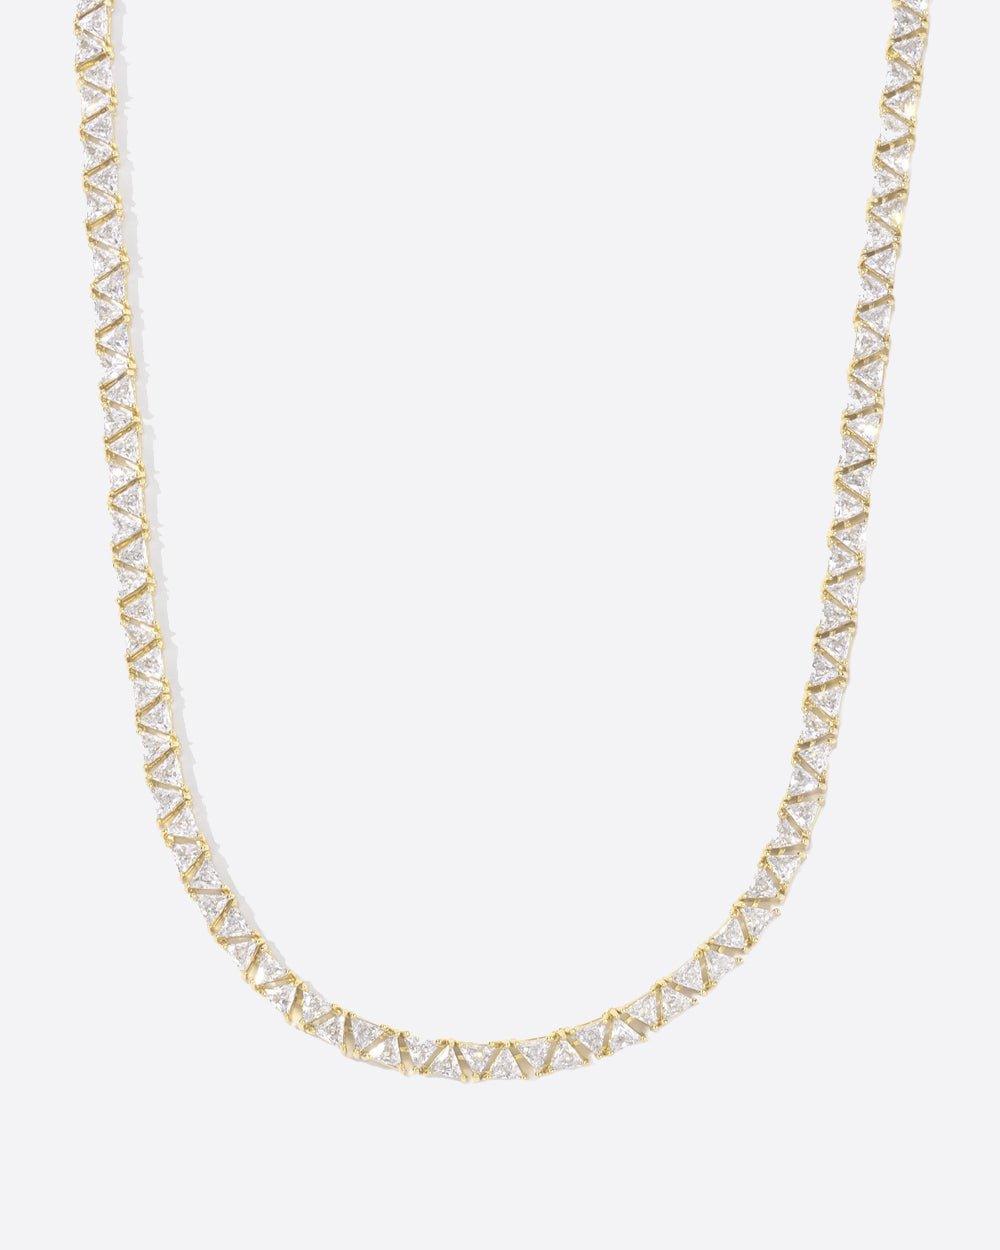 TRIANGLE TENNIS CHAIN. - 5MM 18K GOLD - DRIP IN THE JEWEL